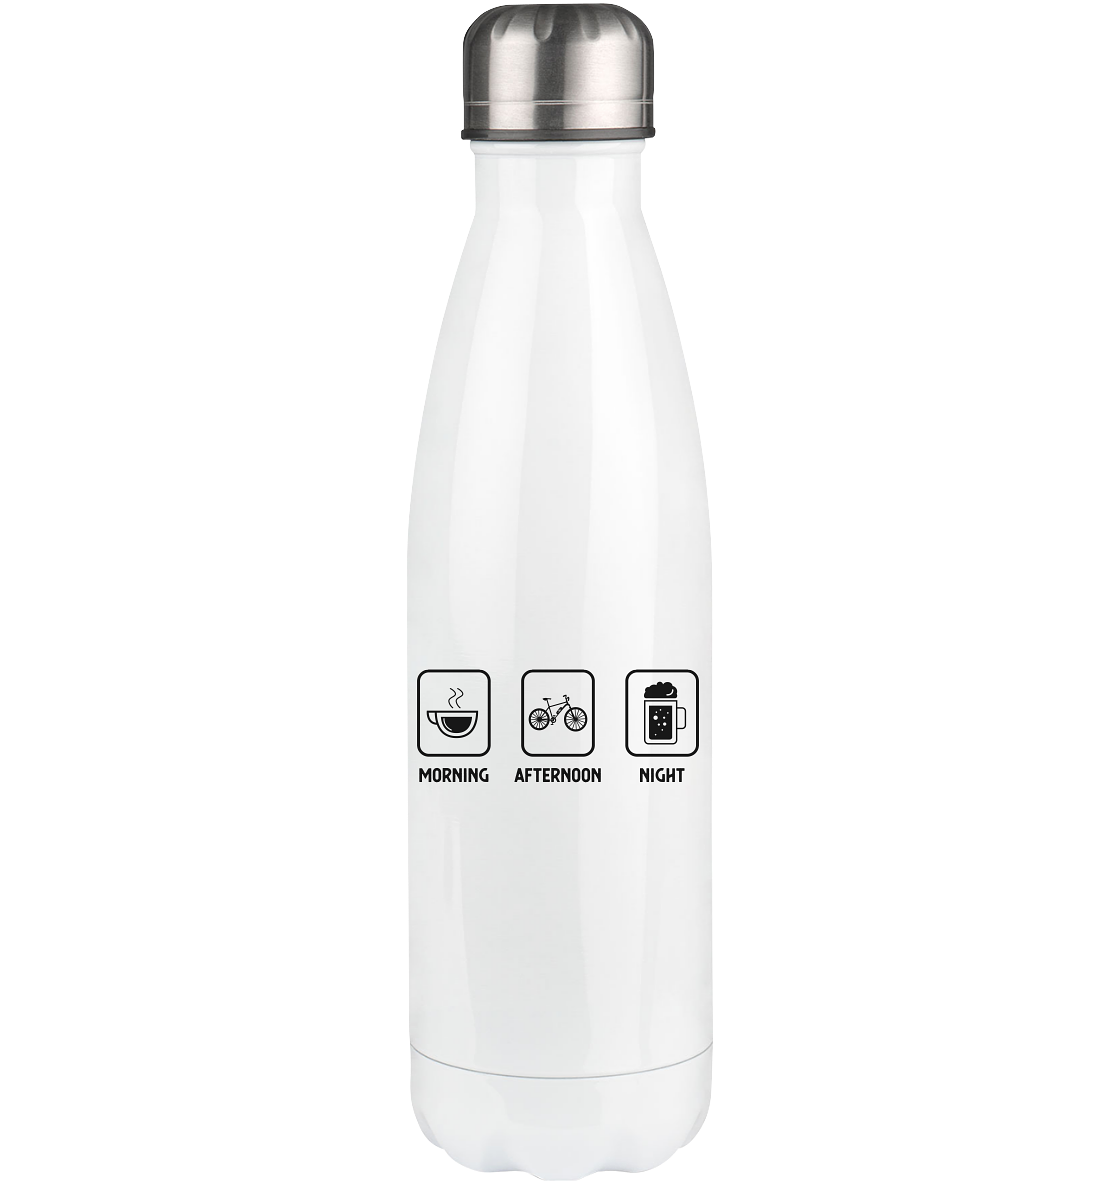 Morning Afternoon Night and E-Bike - Edelstahl Thermosflasche e-bike 500ml